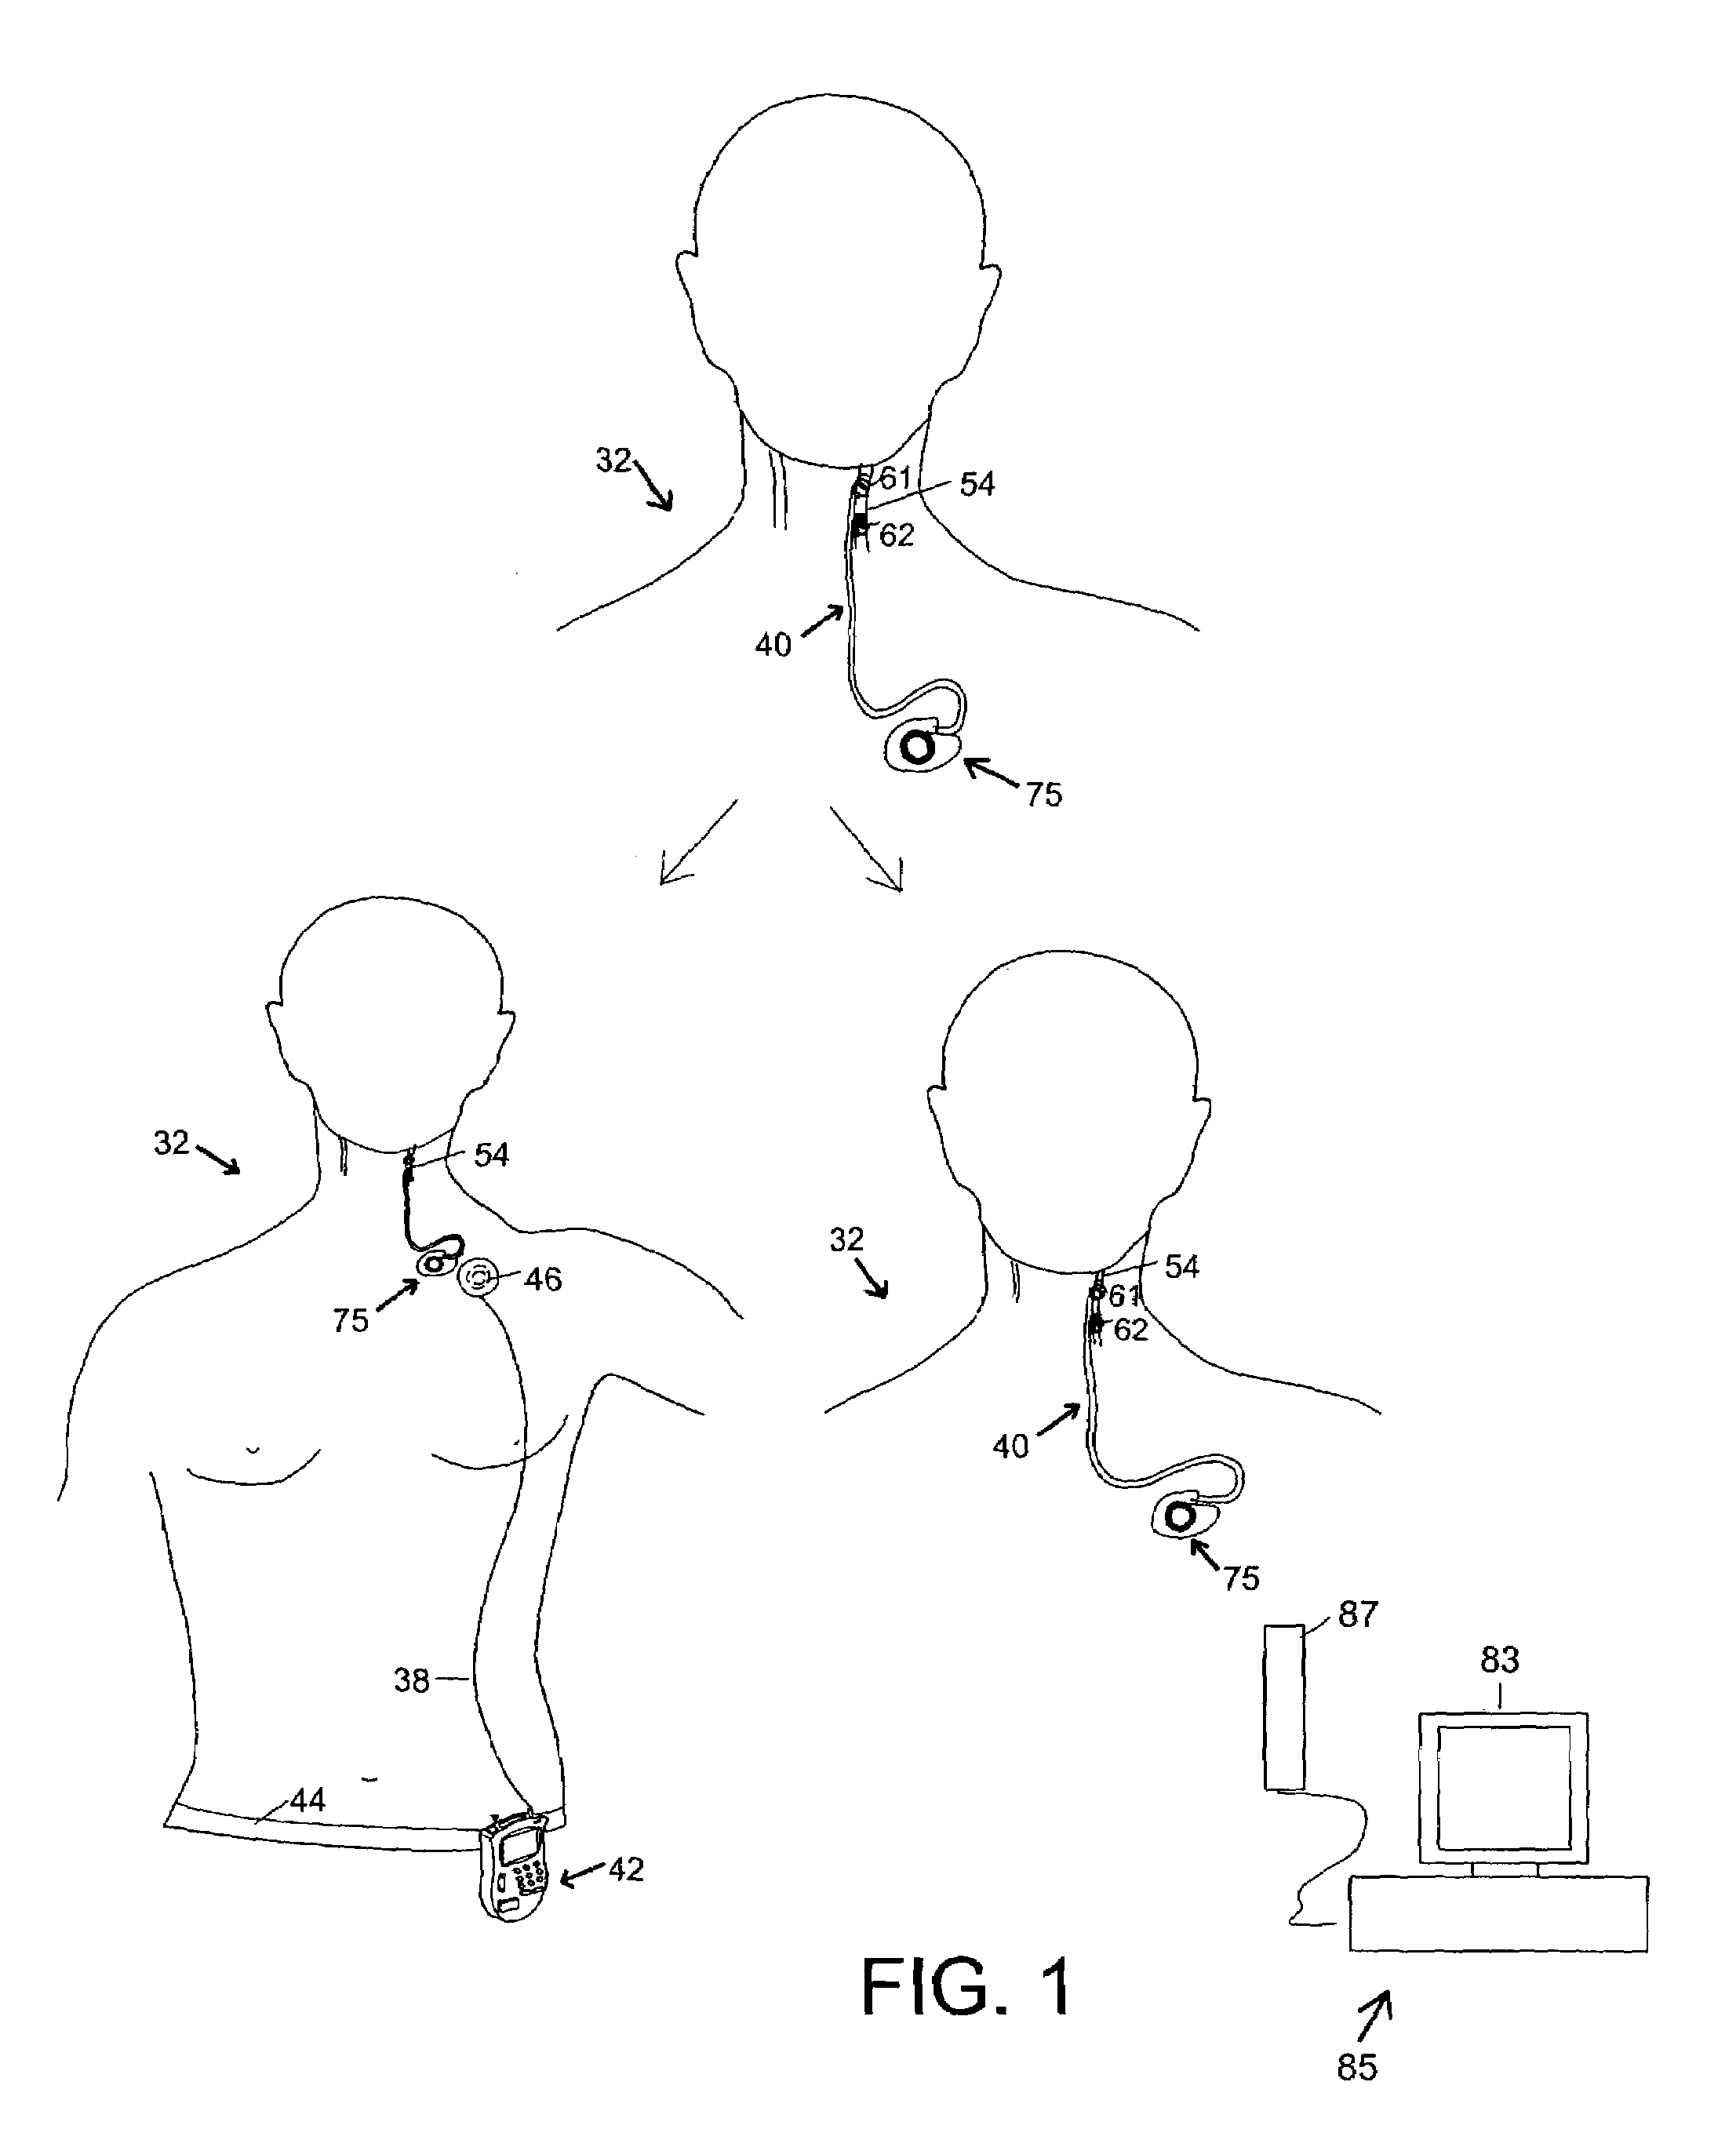 Method and system for providing pulsed electrical stimulation to a craniel nerve of a patient to provide therapy for neurological and neuropsychiatric disorders